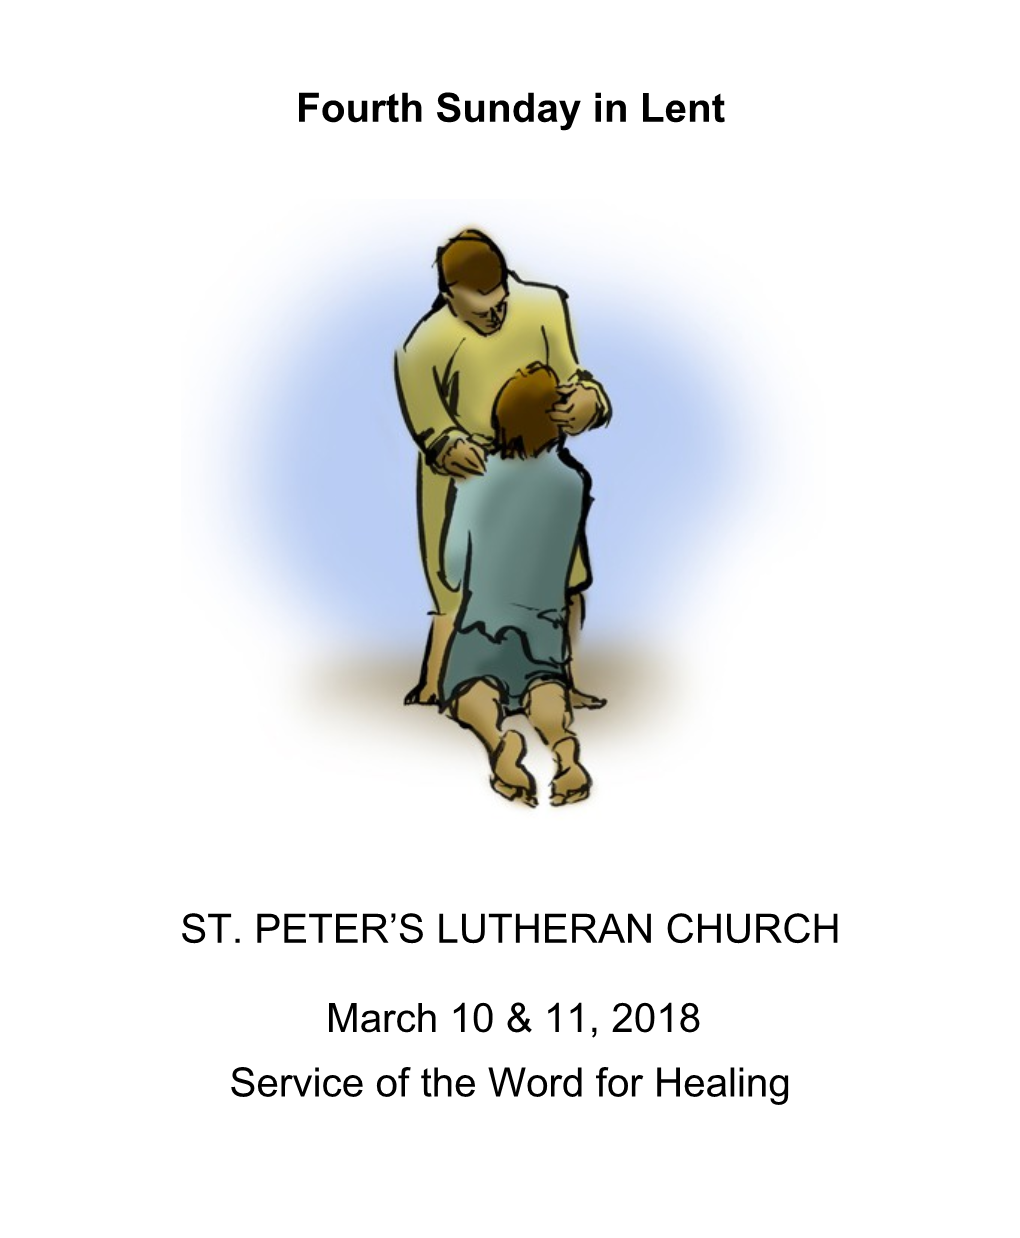 ST. PETER S EVANGELICAL LUTHERAN CHURCH Welcoming All to Know and Love Jesus